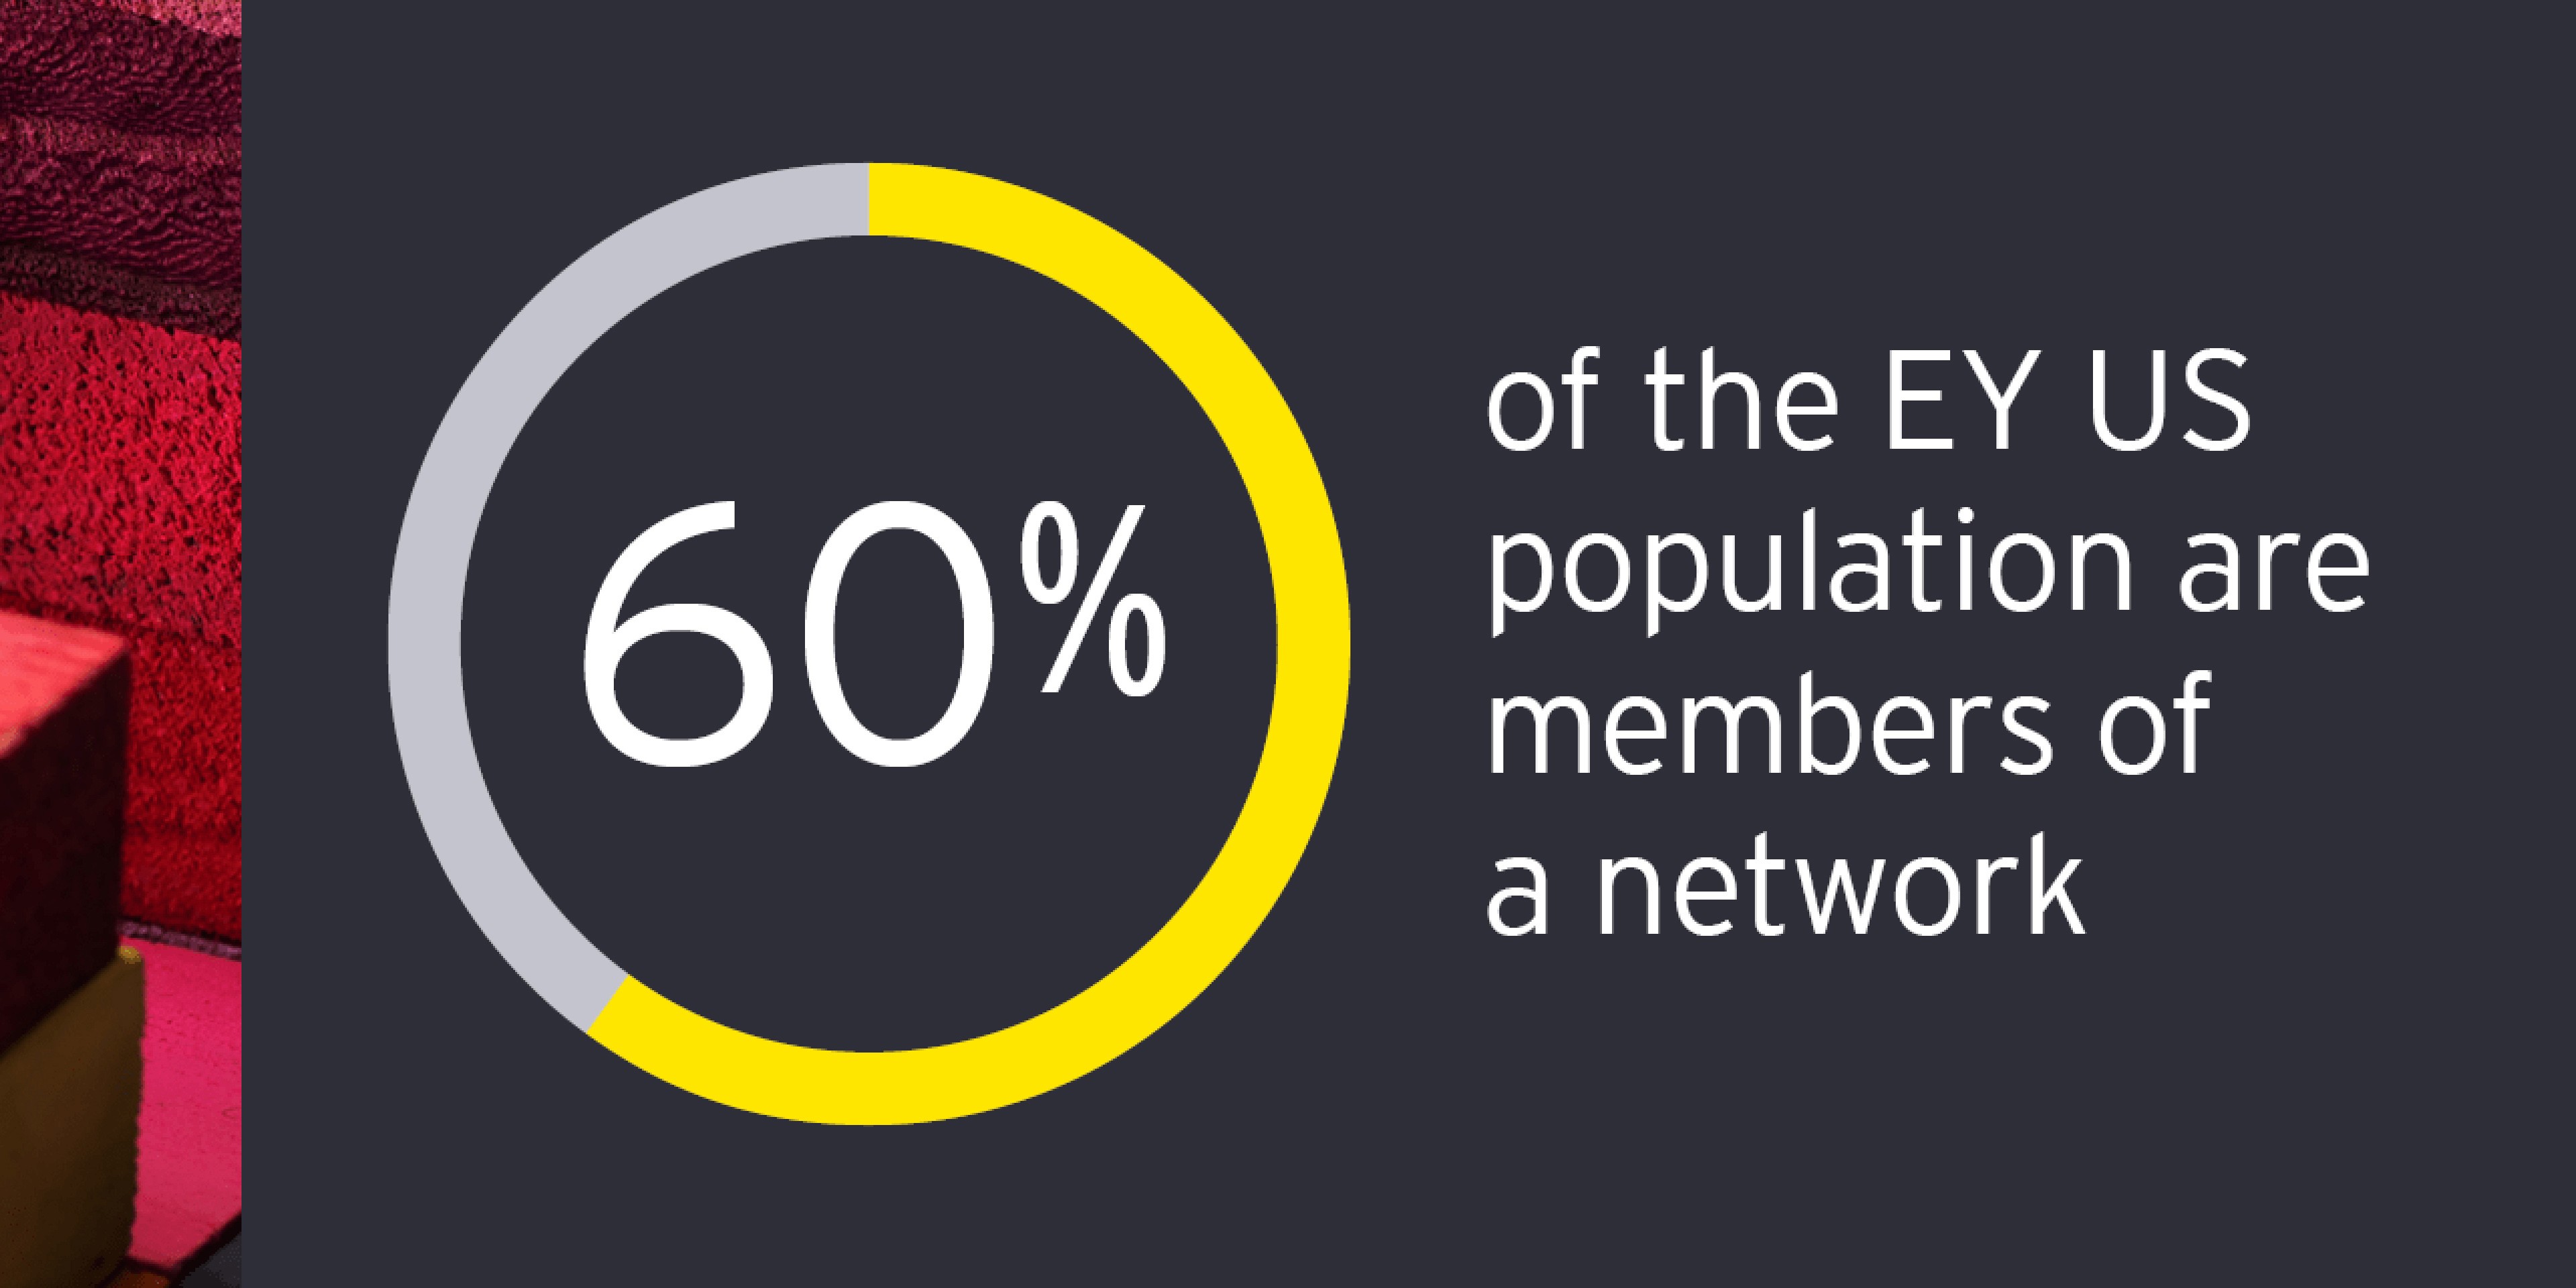 60% of the EY US population are members of a network